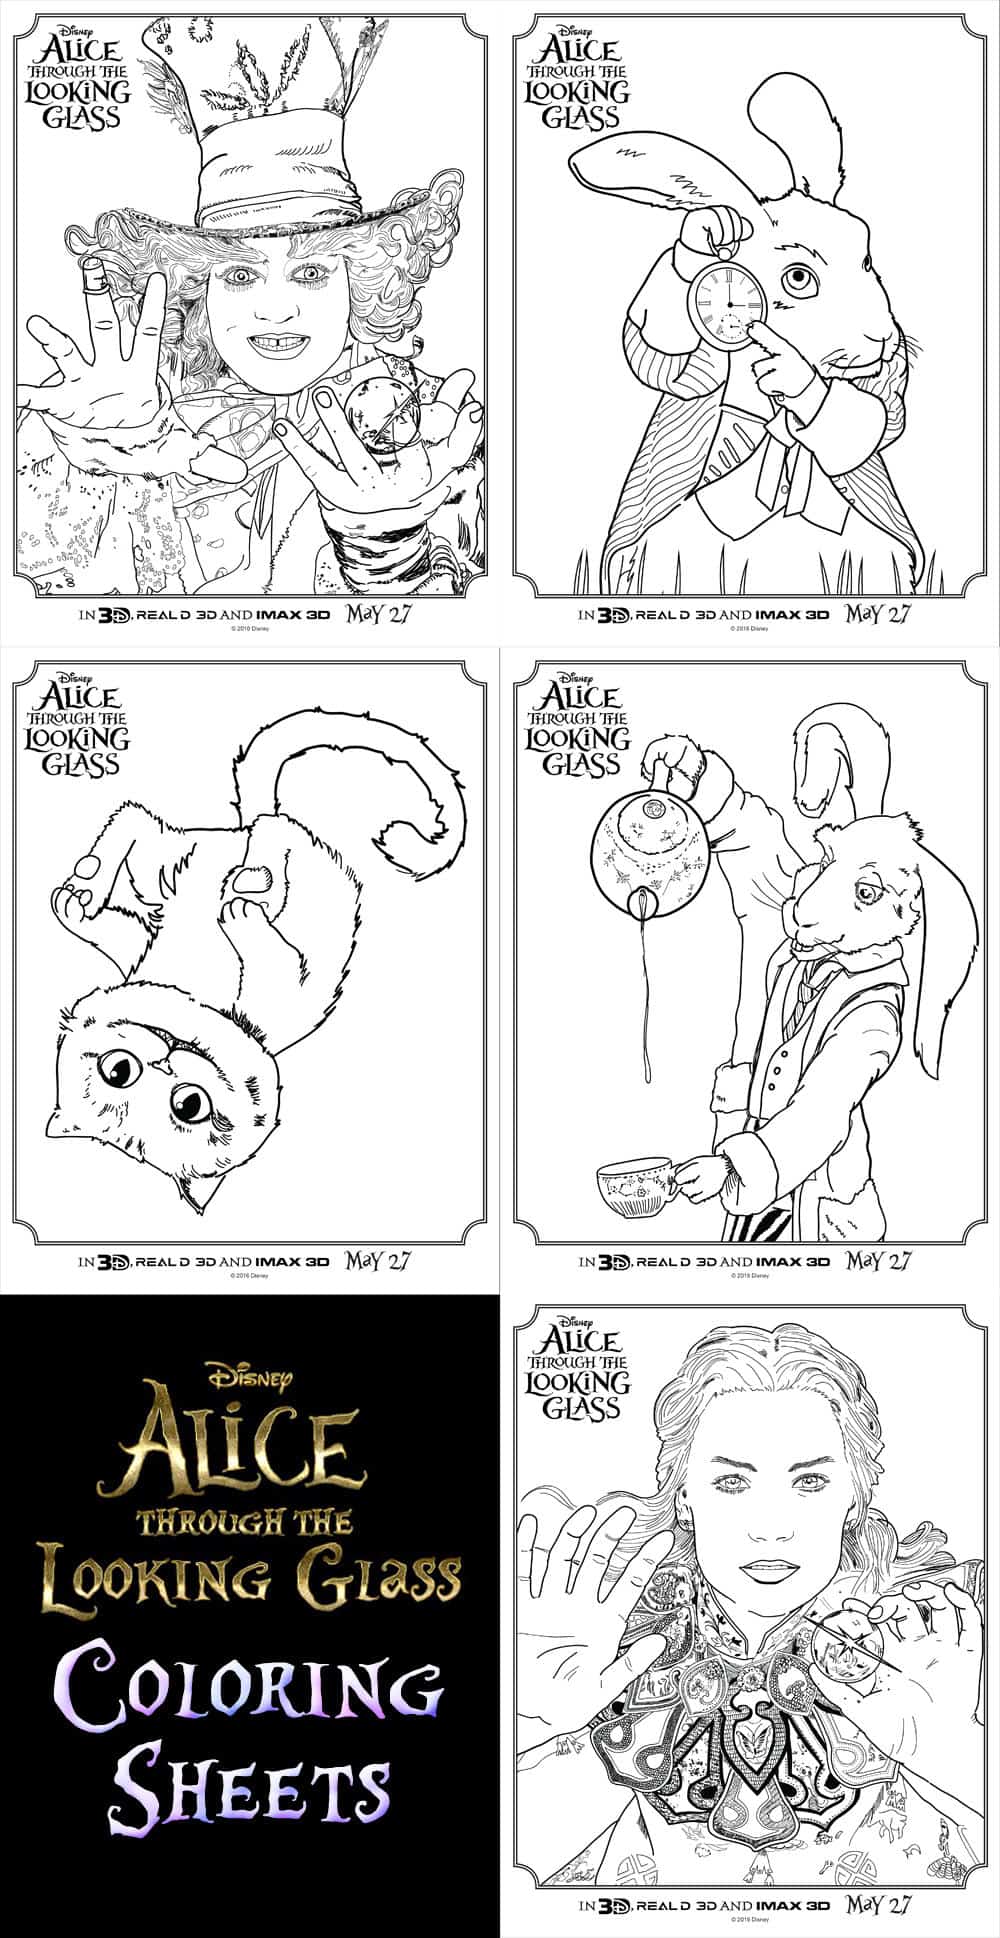 Printables – Alice Through The Looking Glass Coloring Sheets